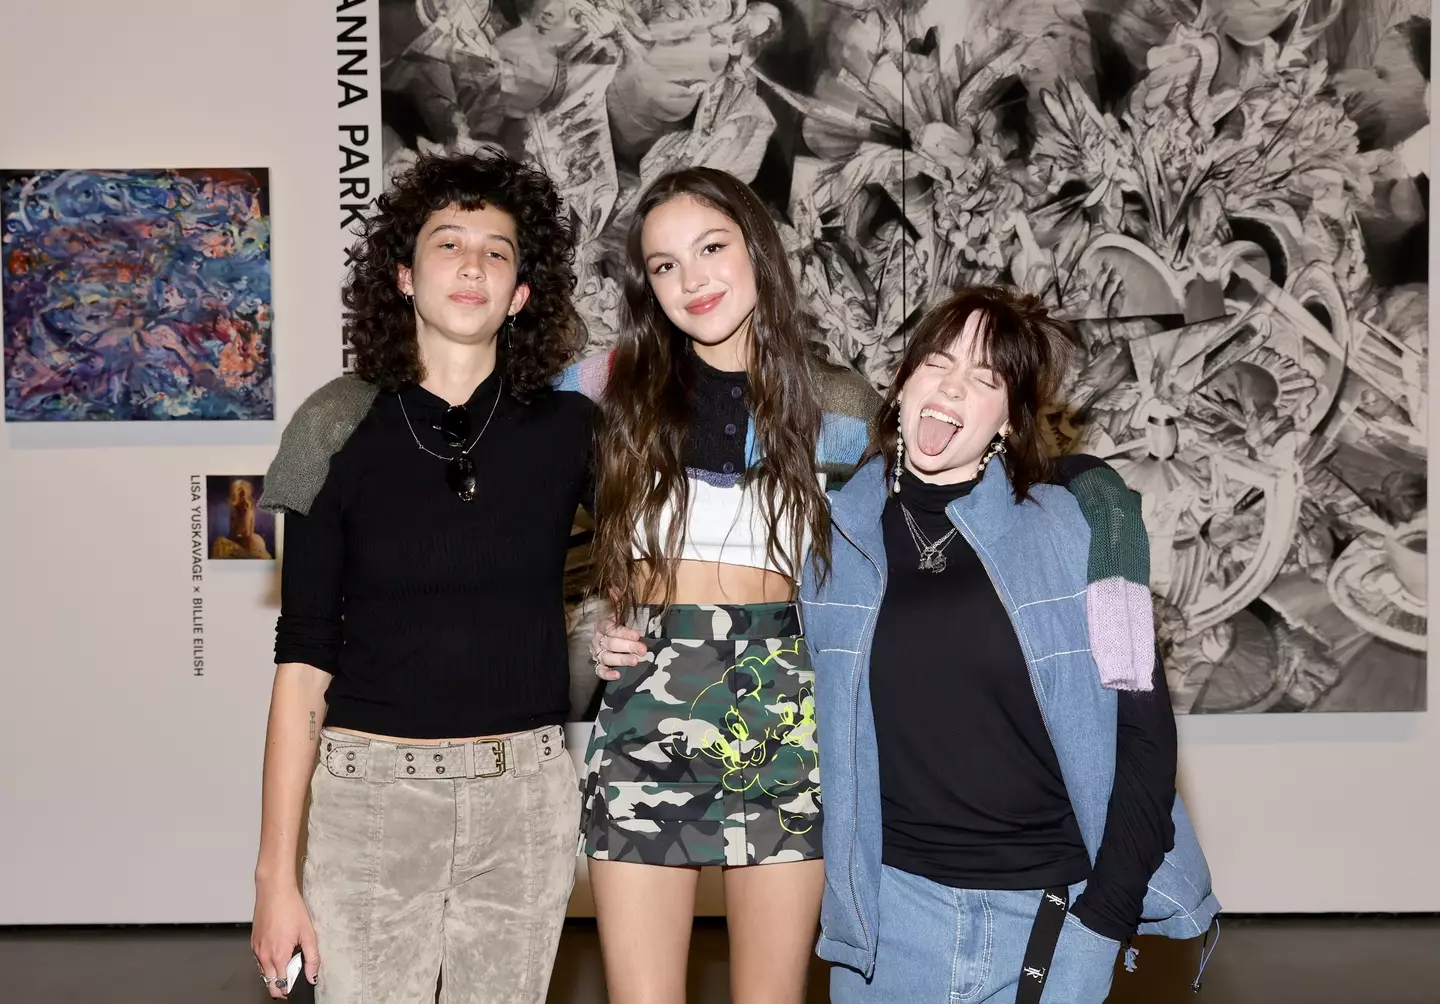 Billie and Olivia pictured with fellow singer Towa Bird.